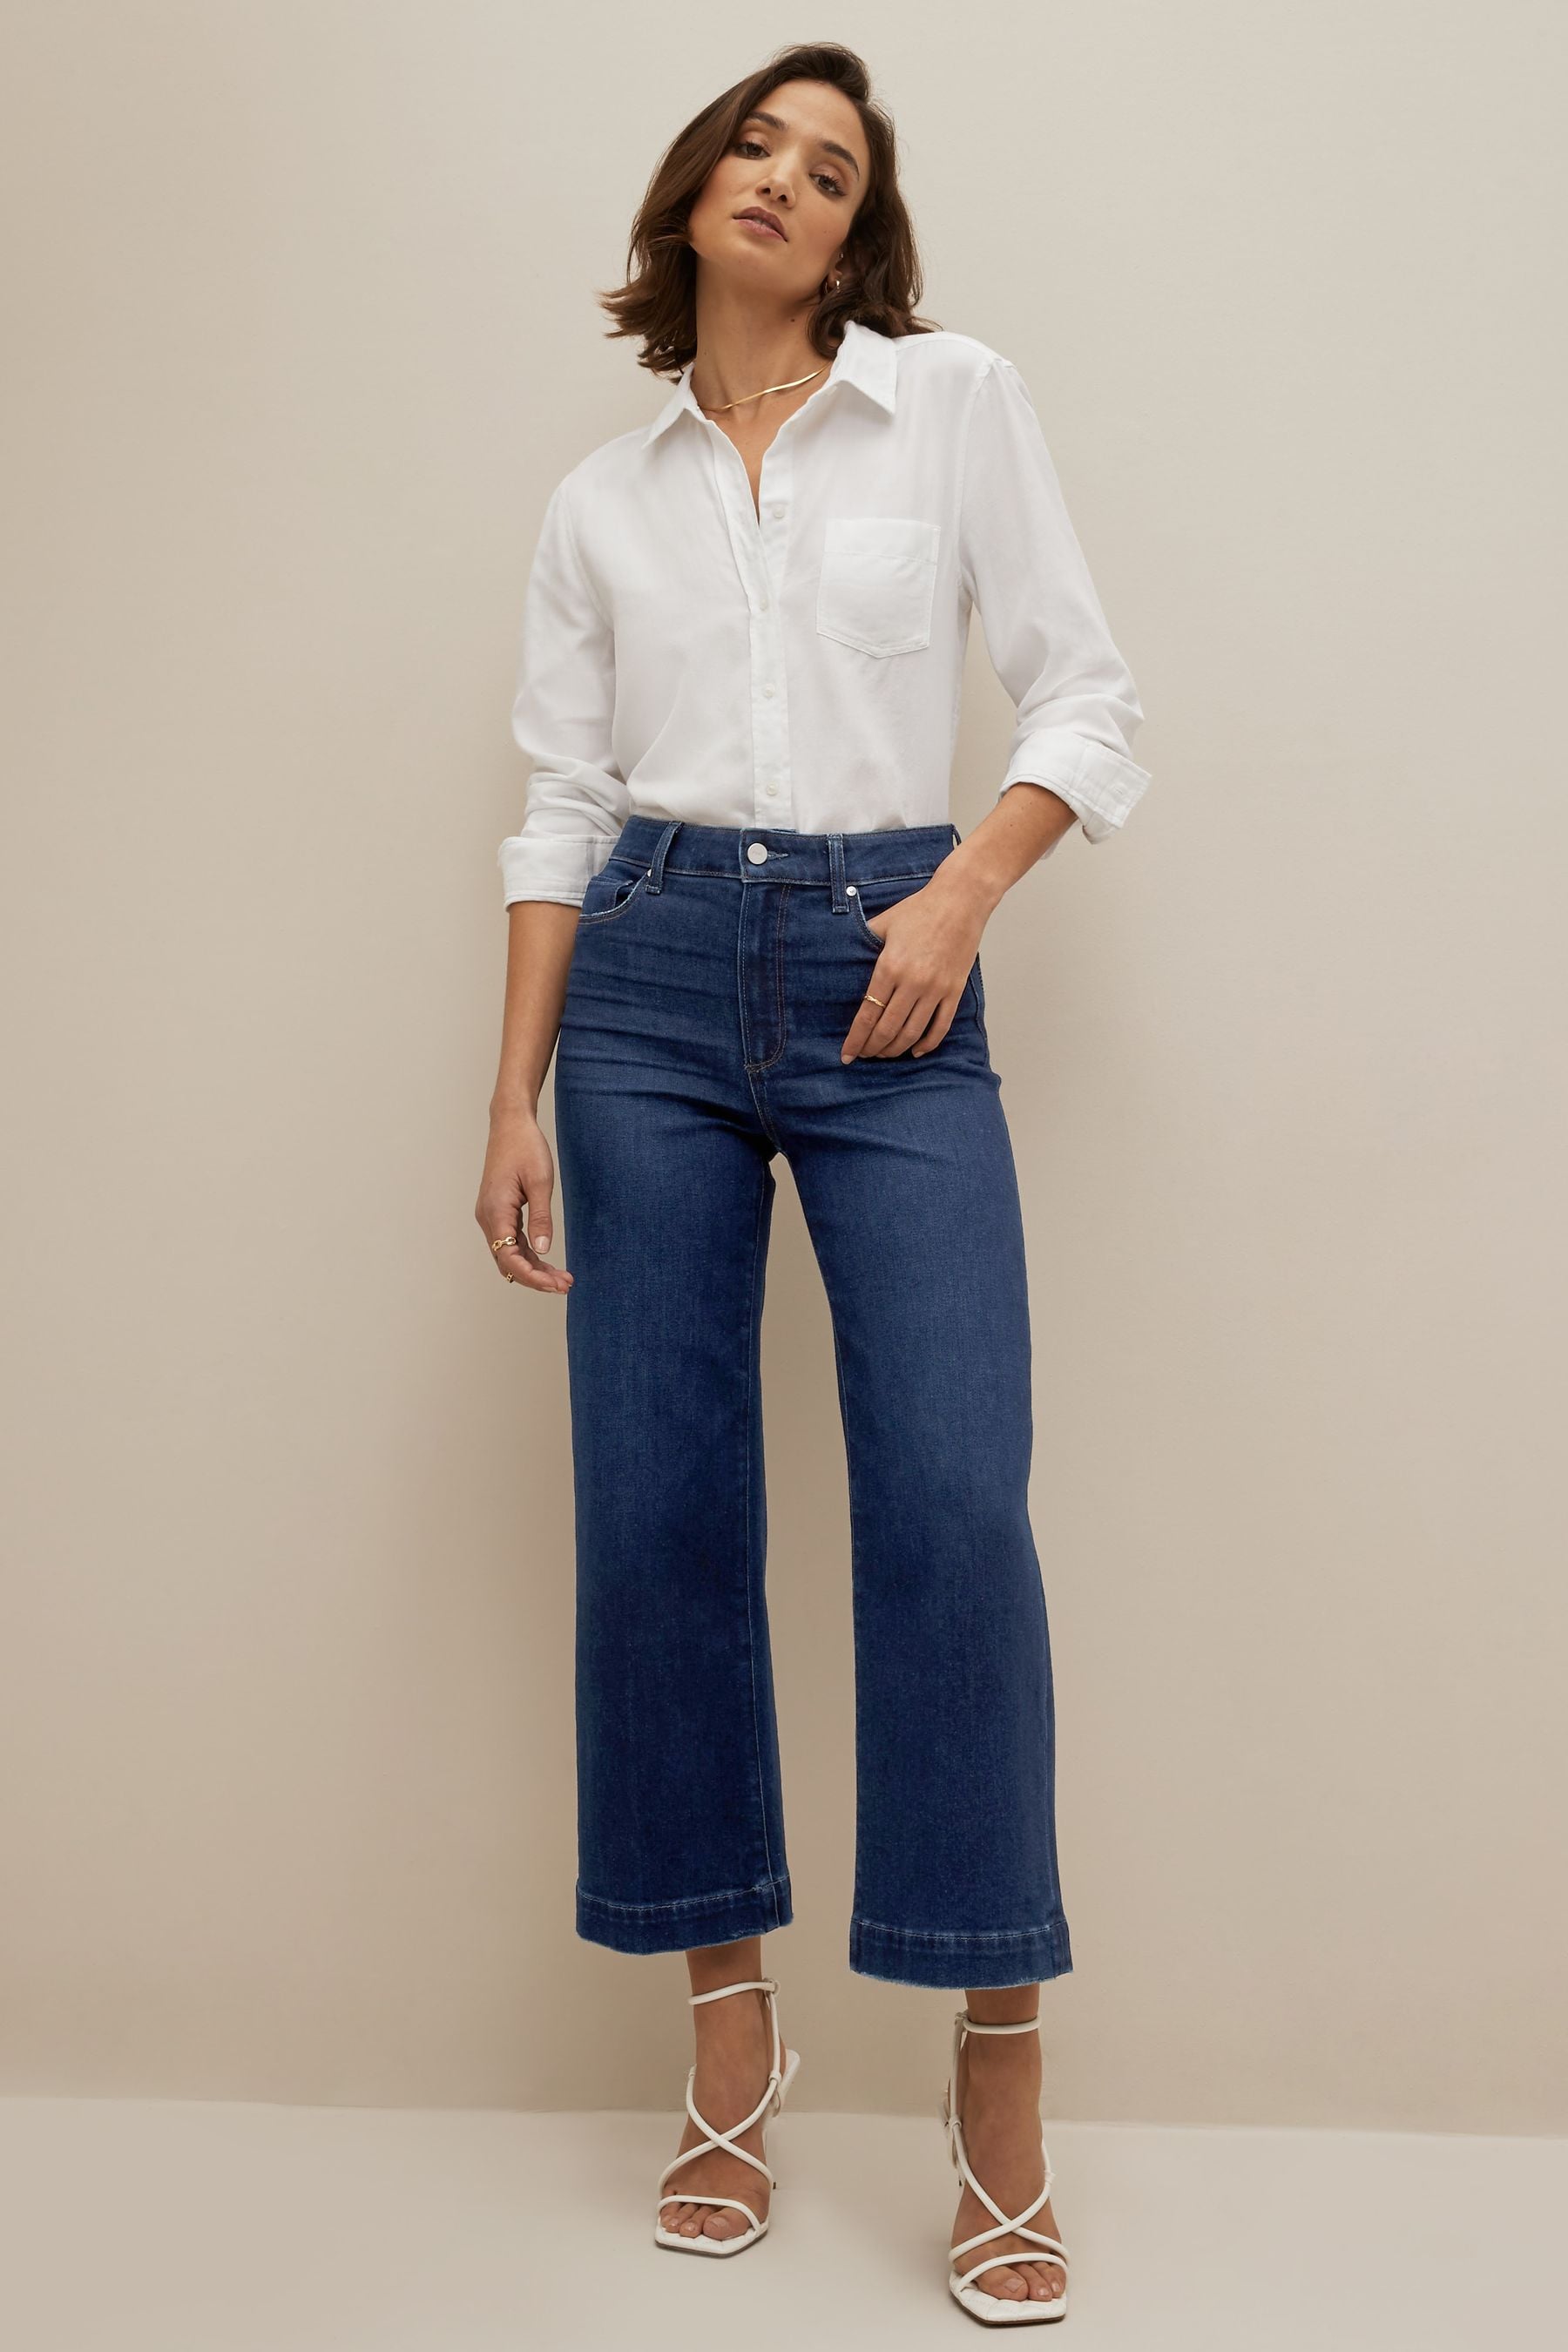 Buy Paige Anessa High Waisted Wide Leg Jeans from the Next UK online shop